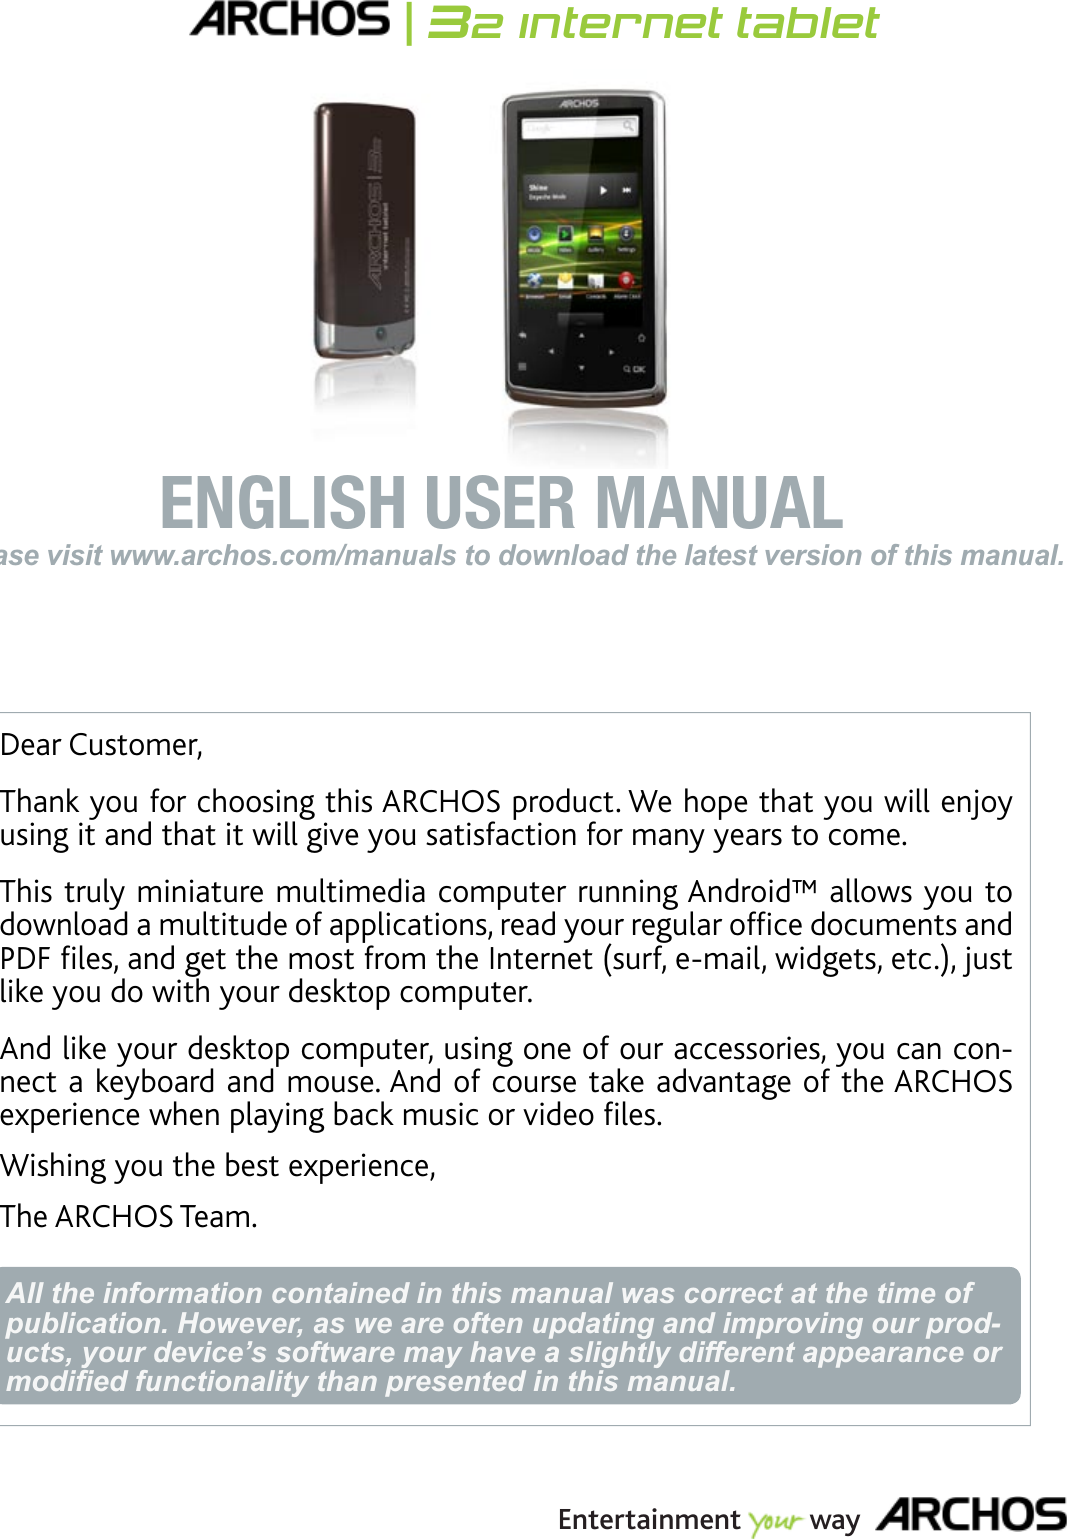 ENGLISHPlease visit www.archos.com/manuals to download the latest version of this manual.ENGLISH USER MANUALEntertainment way|32 internet tabletDear Customer,Thank you for choosing this ARCHOS product. We hope that you will enjoy using it and that it will give you satisfaction for many years to come.This truly miniature multimedia computer running Android™ allows you to FQYPNQCFCOWNVKVWFGQHCRRNKECVKQPUTGCF[QWTTGIWNCTQHÒEGFQEWOGPVUCPF2&amp;(ÒNGUCPFIGVVJGOQUVHTQOVJG+PVGTPGVUWTHGOCKNYKFIGVUGVELWUVlike you do with your desktop computer. And like your desktop computer, using one of our accessories, you can connect a keyboard and mouse. And of course take advantage of the ARCHOS GZRGTKGPEGYJGPRNC[KPIDCEMOWUKEQTXKFGQÒNGUWishing you the best experience,The ARCHOS Team.All the information contained in this manual was correct at the time of publication. However, as we are often updating and improving our prod-ucts, your device’s software may have a slightly different appearance or PRGL¿HGIXQFWLRQDOLW\WKDQSUHVHQWHGLQWKLVPDQXDO